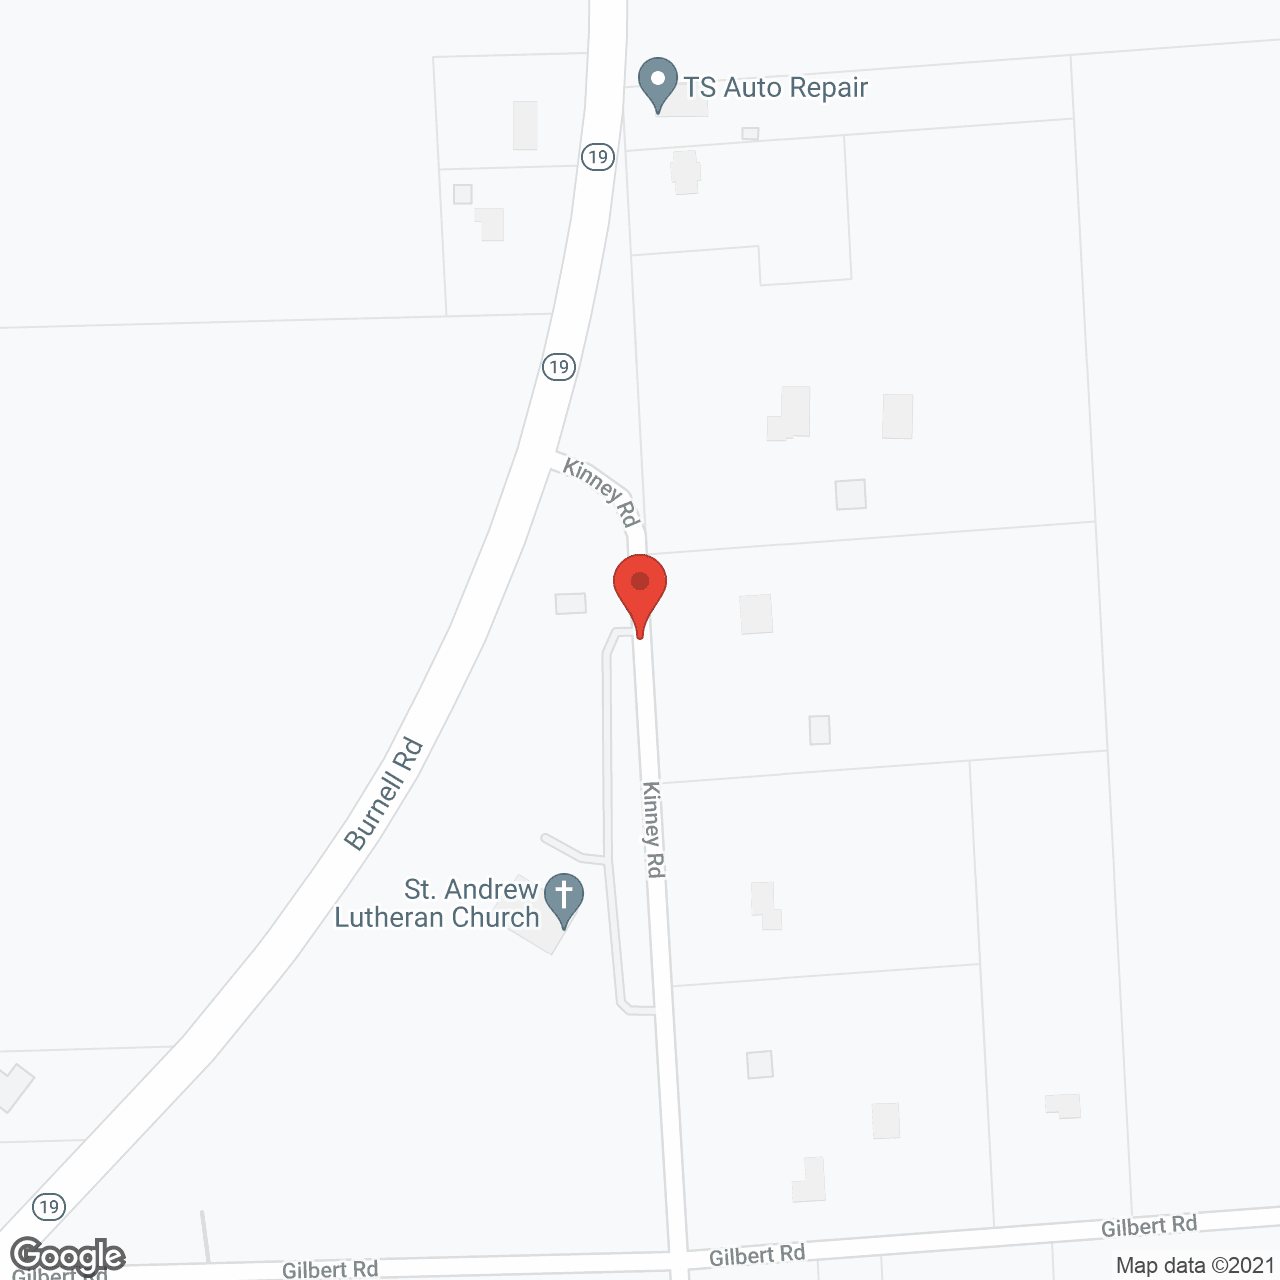 C and C in google map